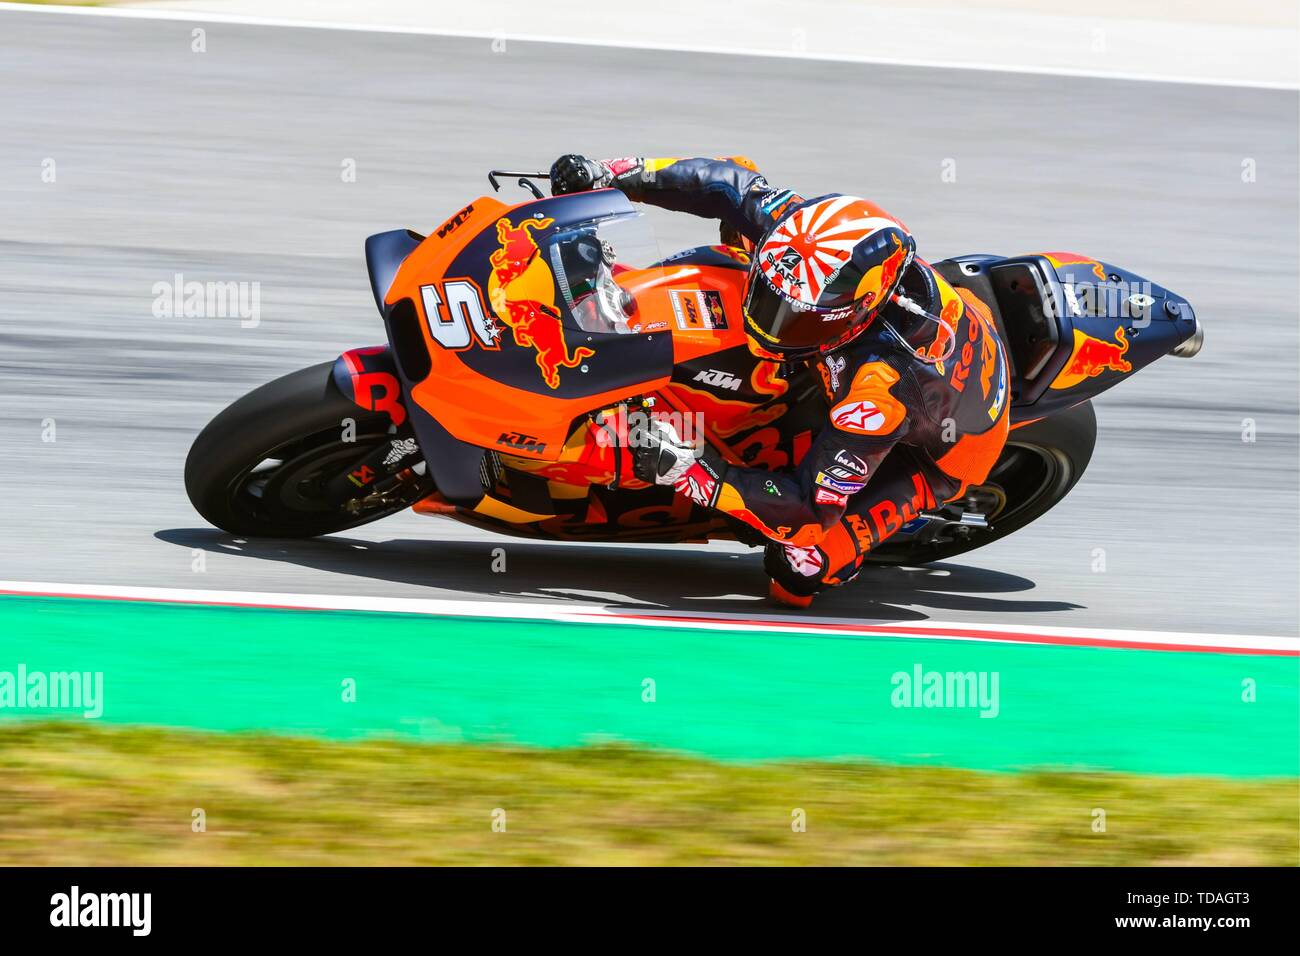 JOHANN ZARCO (5) of France and Red Bull KTM Factory during the MOTO GP Free  Practice 2 of the Ctalunya Grand Prix at Circuit de Barcelona racetrack in  Montmelo, Spain on June